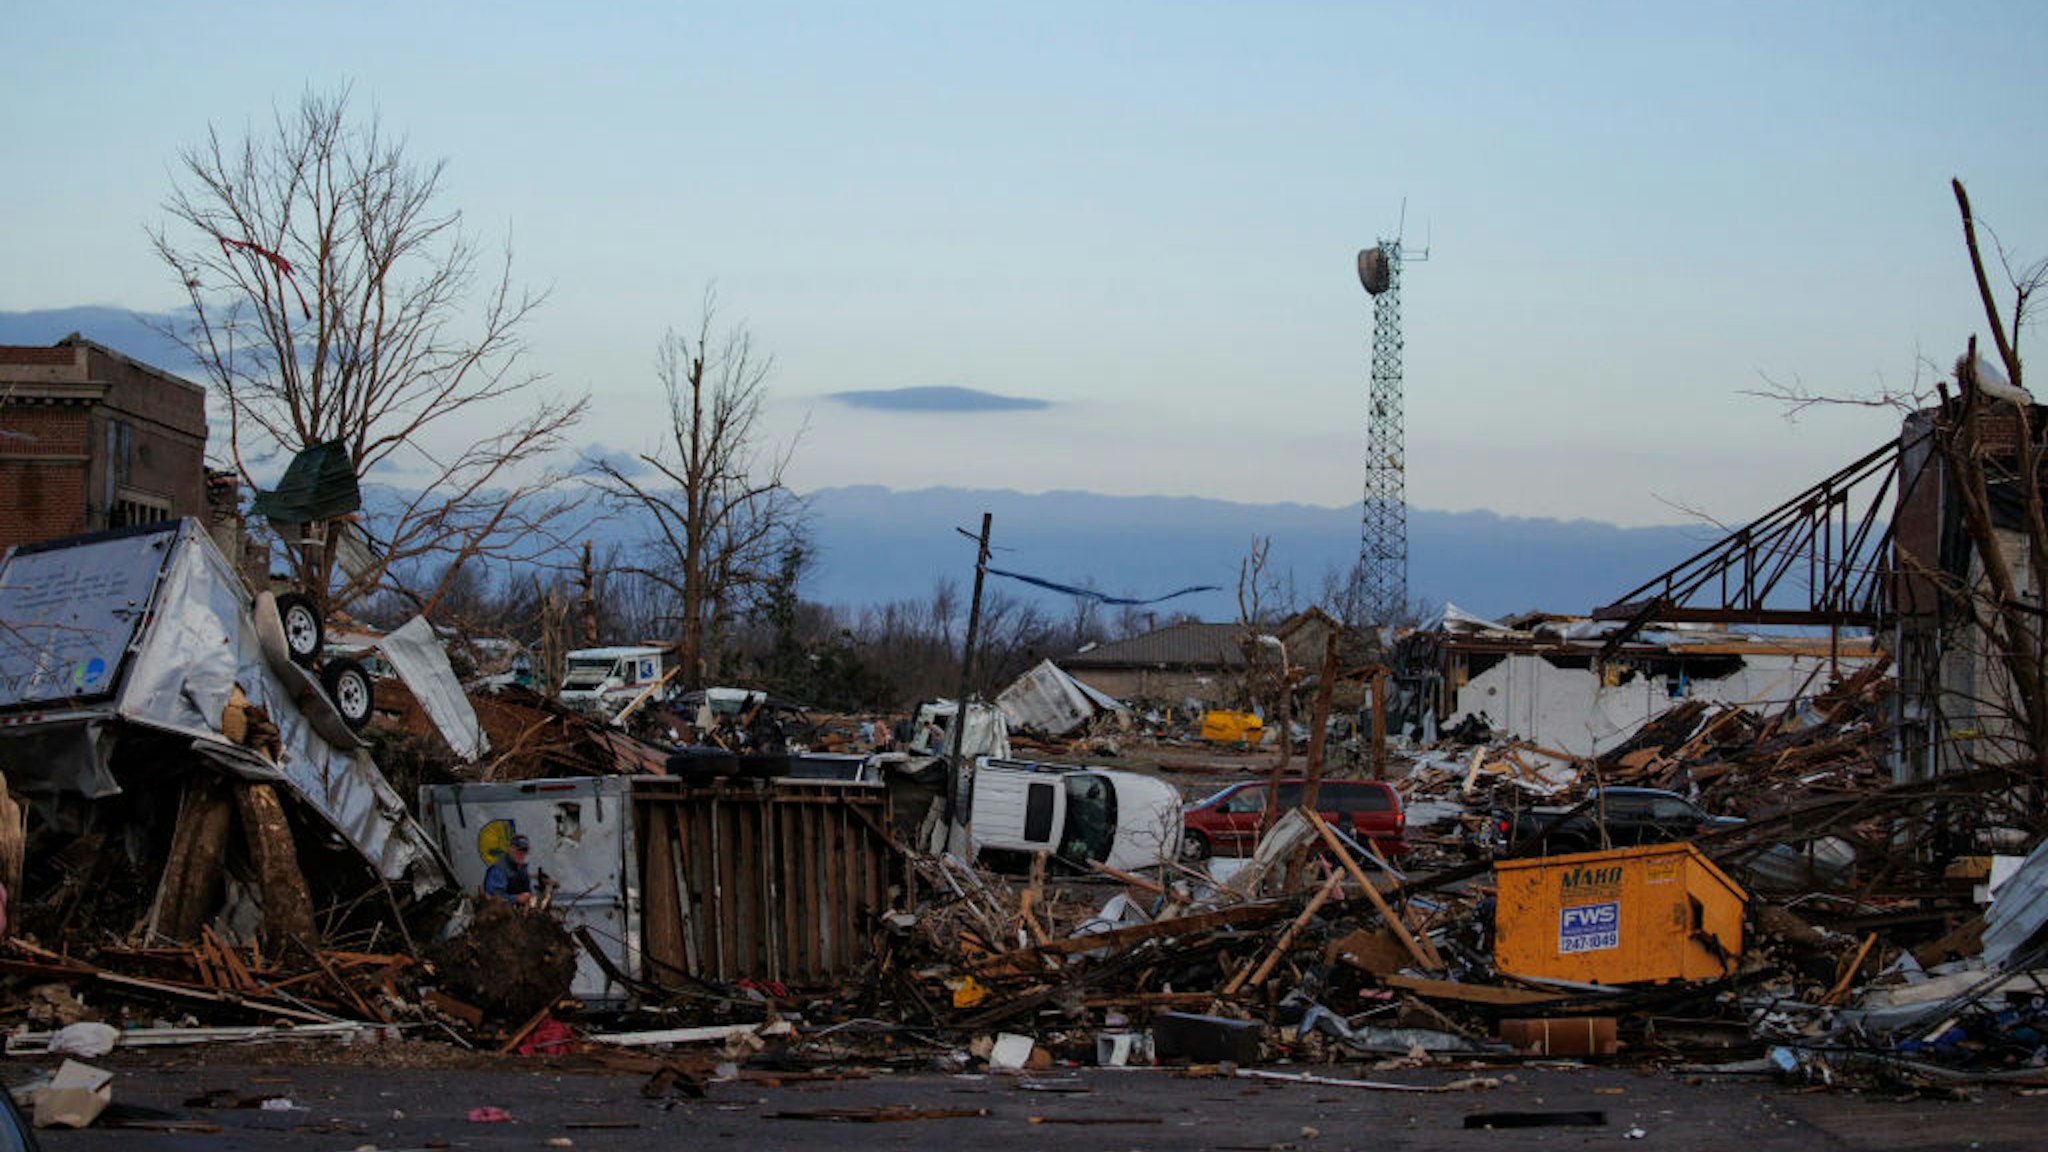 Heavy damage is seen downtown after a tornado swept through the area on December 11, 2021 in Mayfield, Kentucky.